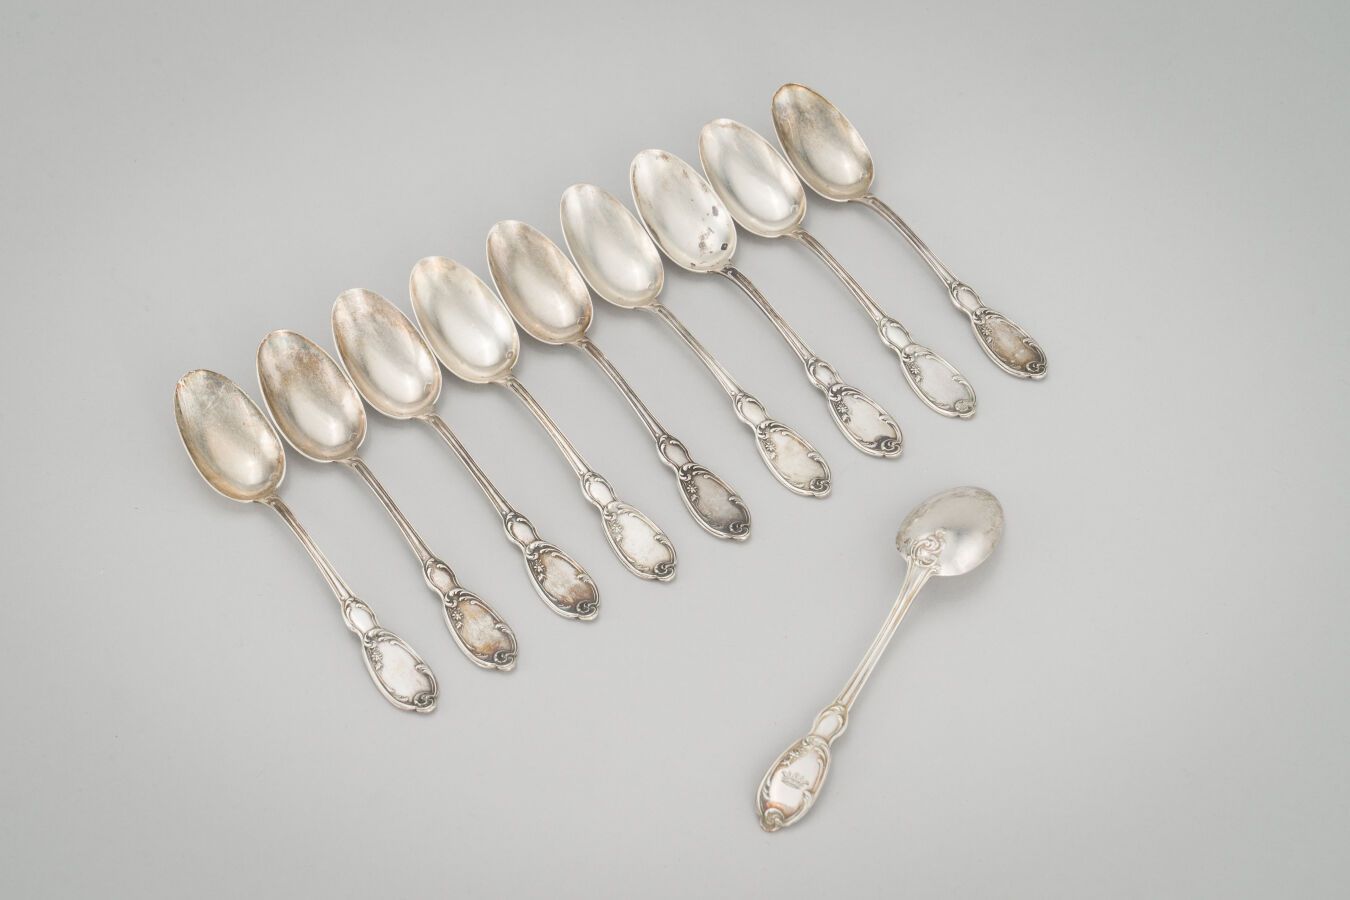 Null 81. Suite of 10 silver tea spoons (950/1000) model scrolled with foliage an&hellip;